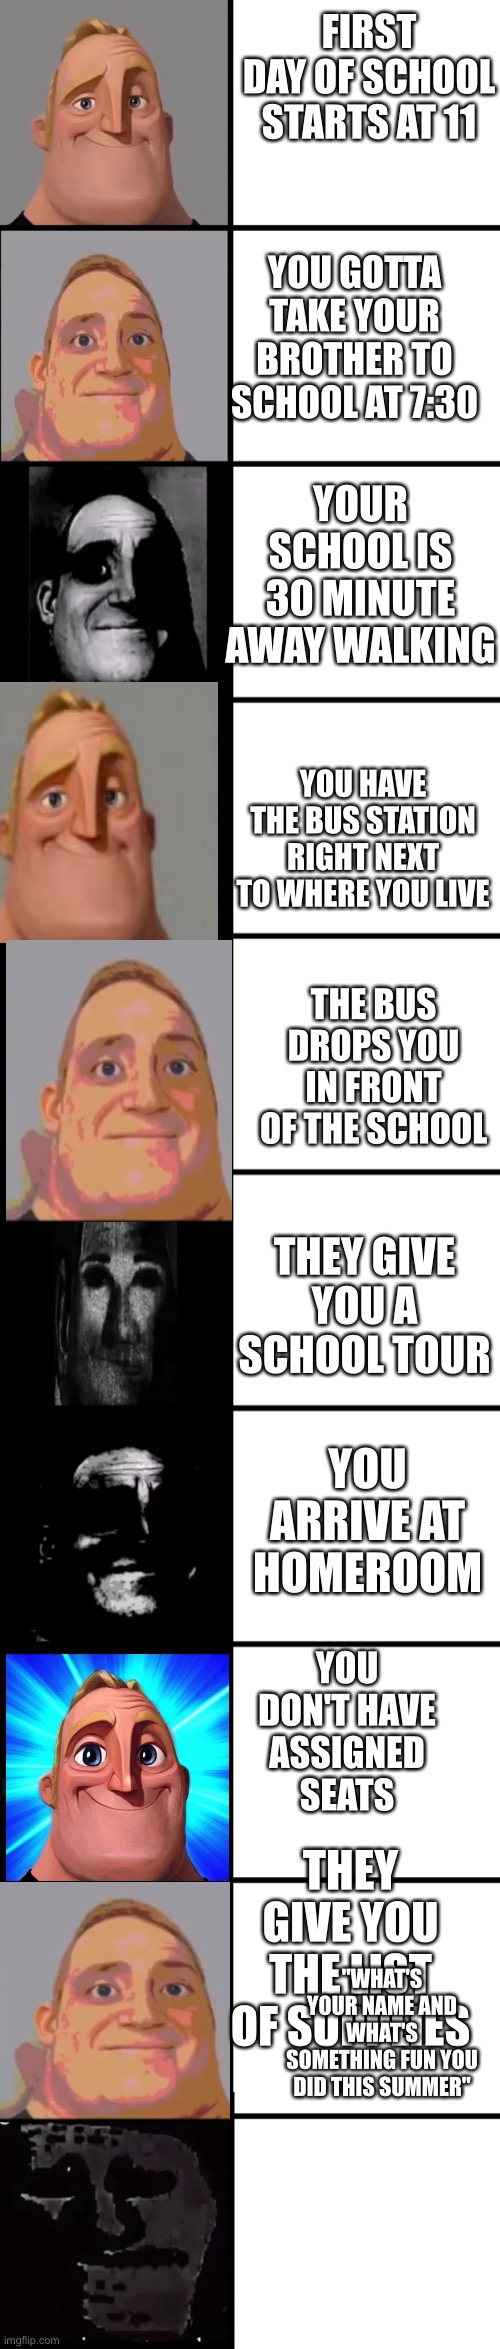 This took me 10 minutes and it still turned out bad ?‍♂️ | FIRST DAY OF SCHOOL STARTS AT 11; YOU GOTTA TAKE YOUR BROTHER TO SCHOOL AT 7:30; YOUR SCHOOL IS 30 MINUTE AWAY WALKING; YOU HAVE THE BUS STATION RIGHT NEXT TO WHERE YOU LIVE; THE BUS DROPS YOU IN FRONT OF THE SCHOOL; THEY GIVE YOU A SCHOOL TOUR; YOU ARRIVE AT HOMEROOM; YOU DON'T HAVE ASSIGNED SEATS; THEY GIVE YOU THE LIST OF SUPPLIES; "WHAT'S YOUR NAME AND WHAT'S SOMETHING FUN YOU DID THIS SUMMER" | image tagged in mr incredible becoming uncanny,mr incredible becoming canny | made w/ Imgflip meme maker